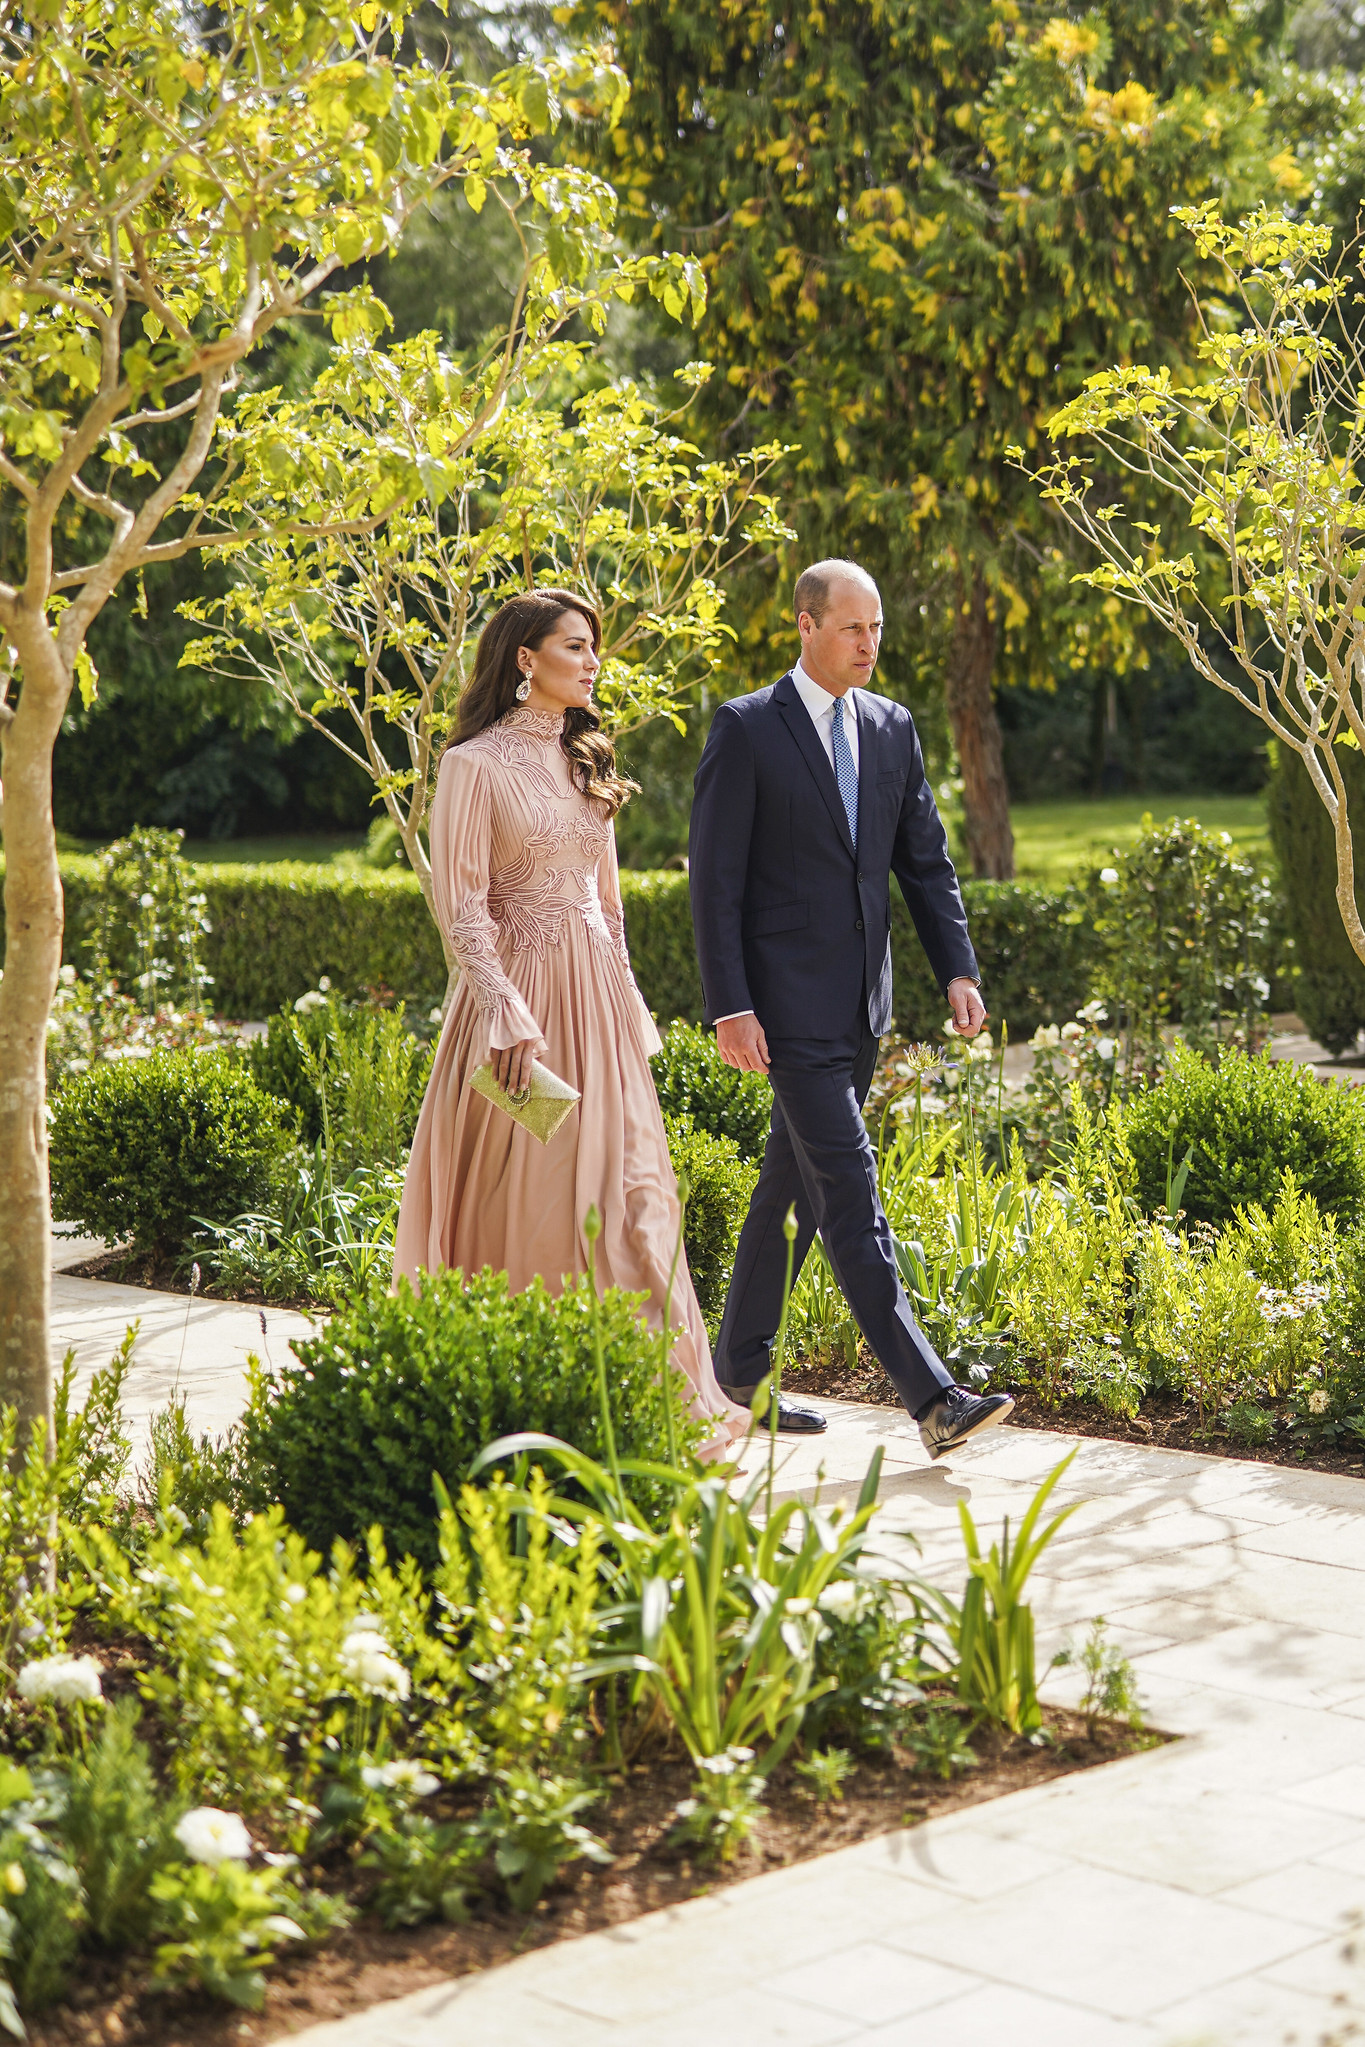 Prince William and Princess Kate of Wales